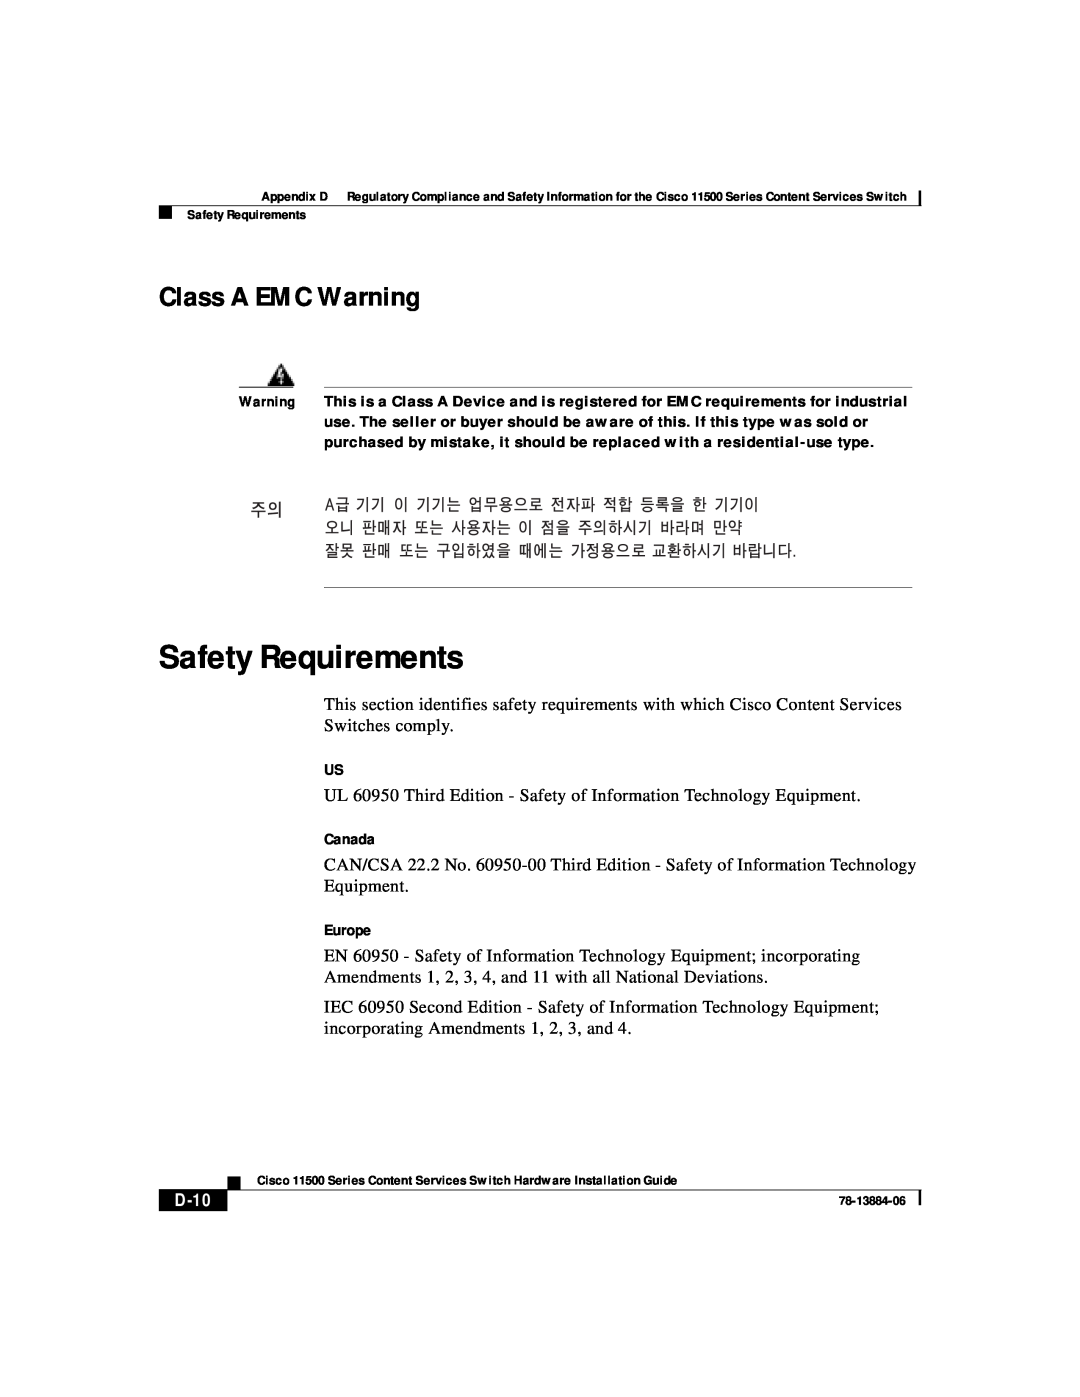 Cisco Systems 11500 Series manual Safety Requirements, Class A EMC Warning, D-10 